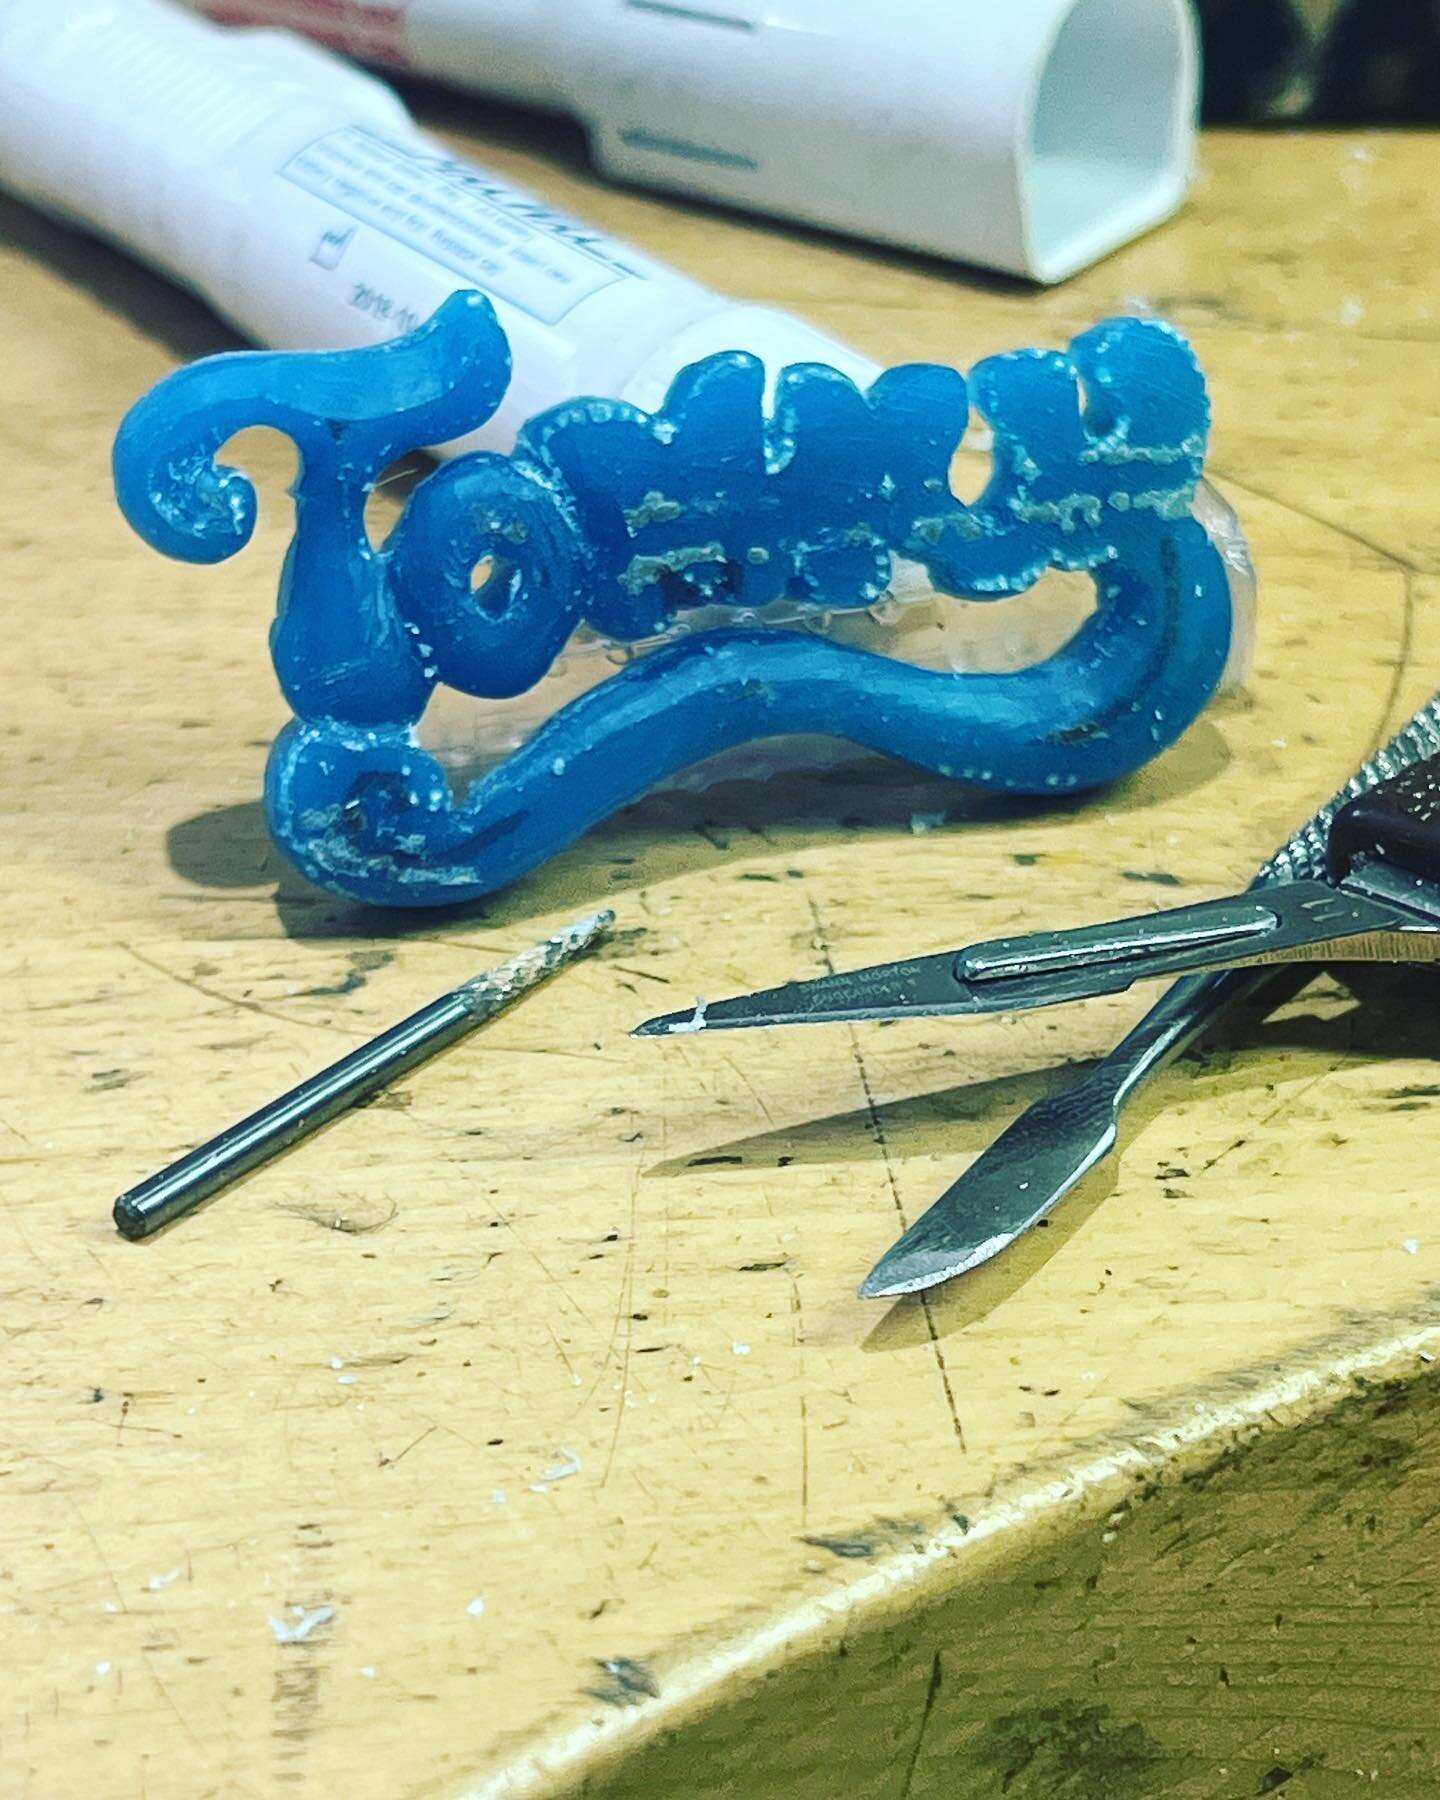 Getting there! Just a few more hours Emily! 😅. 

#handcarved #wax #nameplate #mynameis #fashion #bling #design #traditionaltechniques #jewellery #luxury